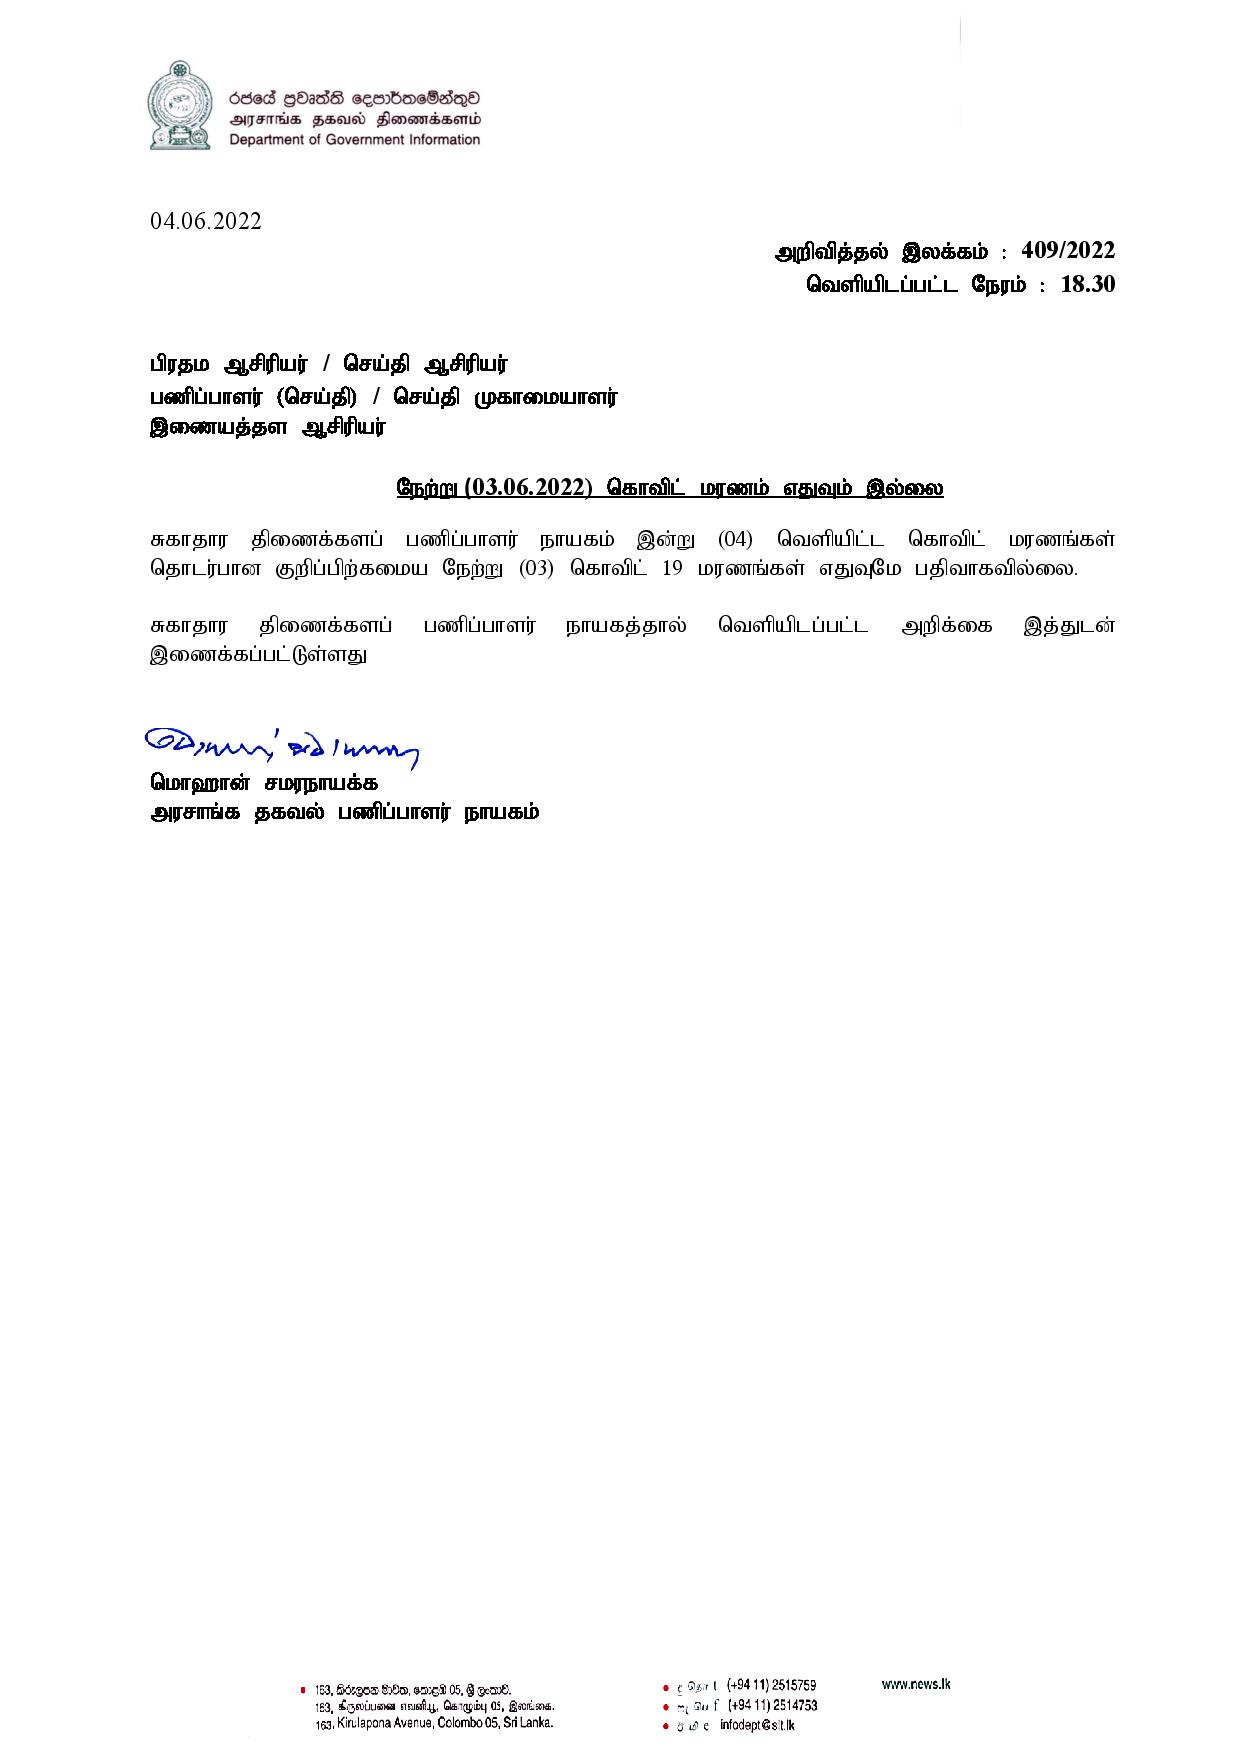 Release No 409 Tamil page 001